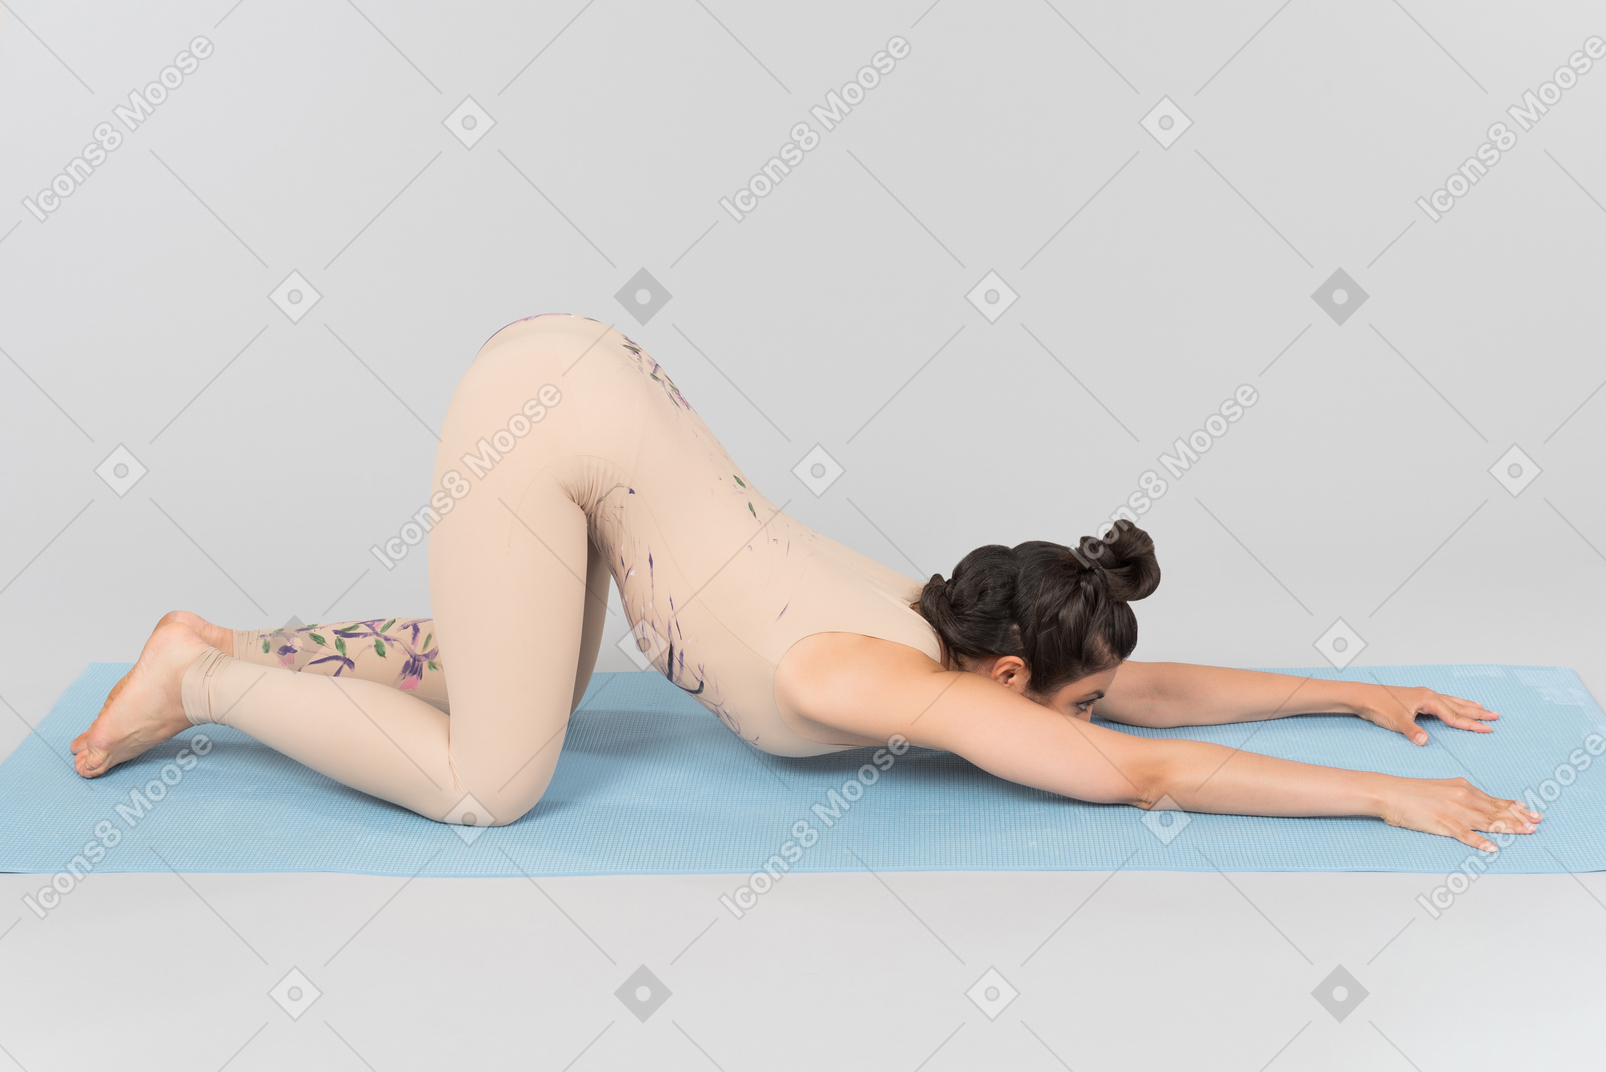 Young indian woman standing in pose on yoga mat